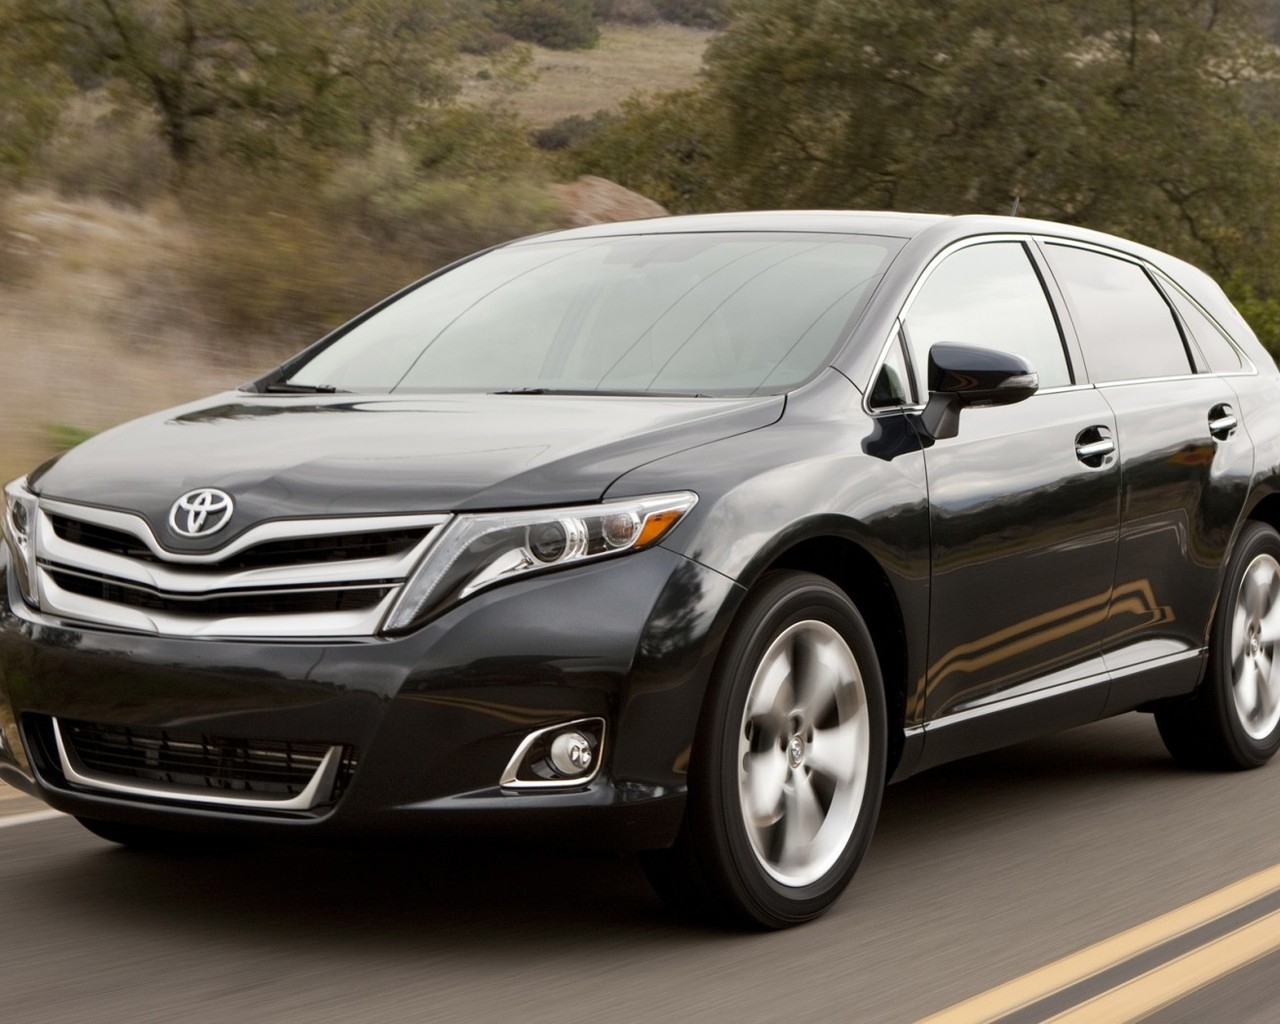 Toyota Venza Crossover for 1280 x 1024 resolution